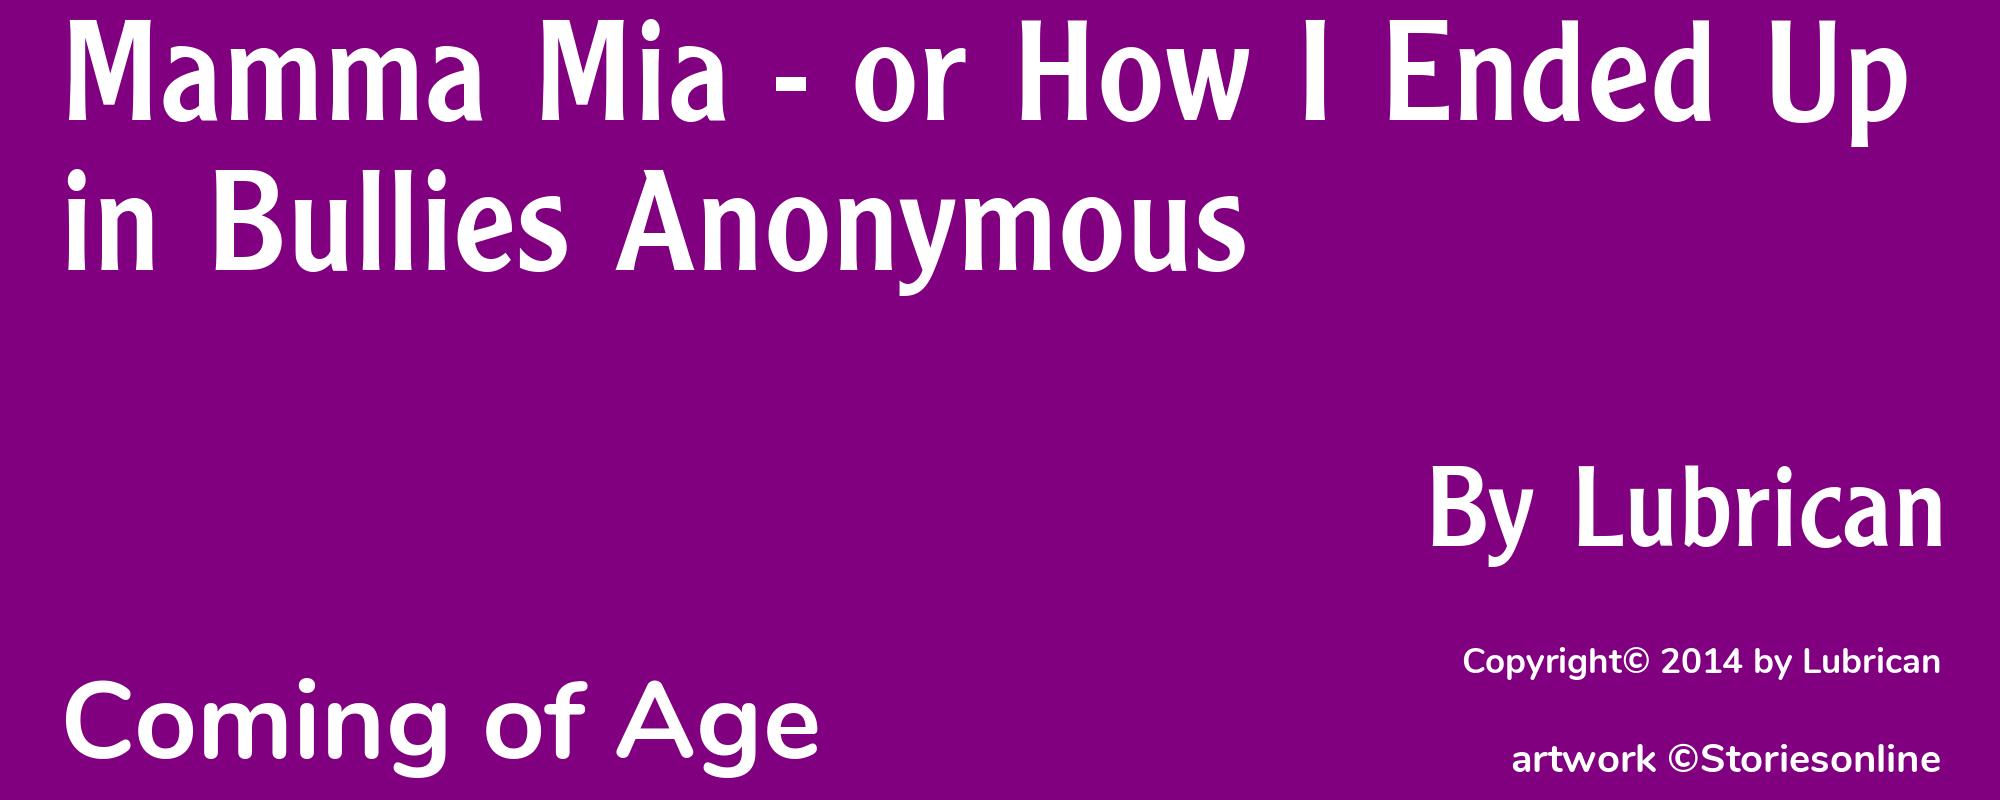 Mamma Mia - or How I Ended Up in Bullies Anonymous - Cover